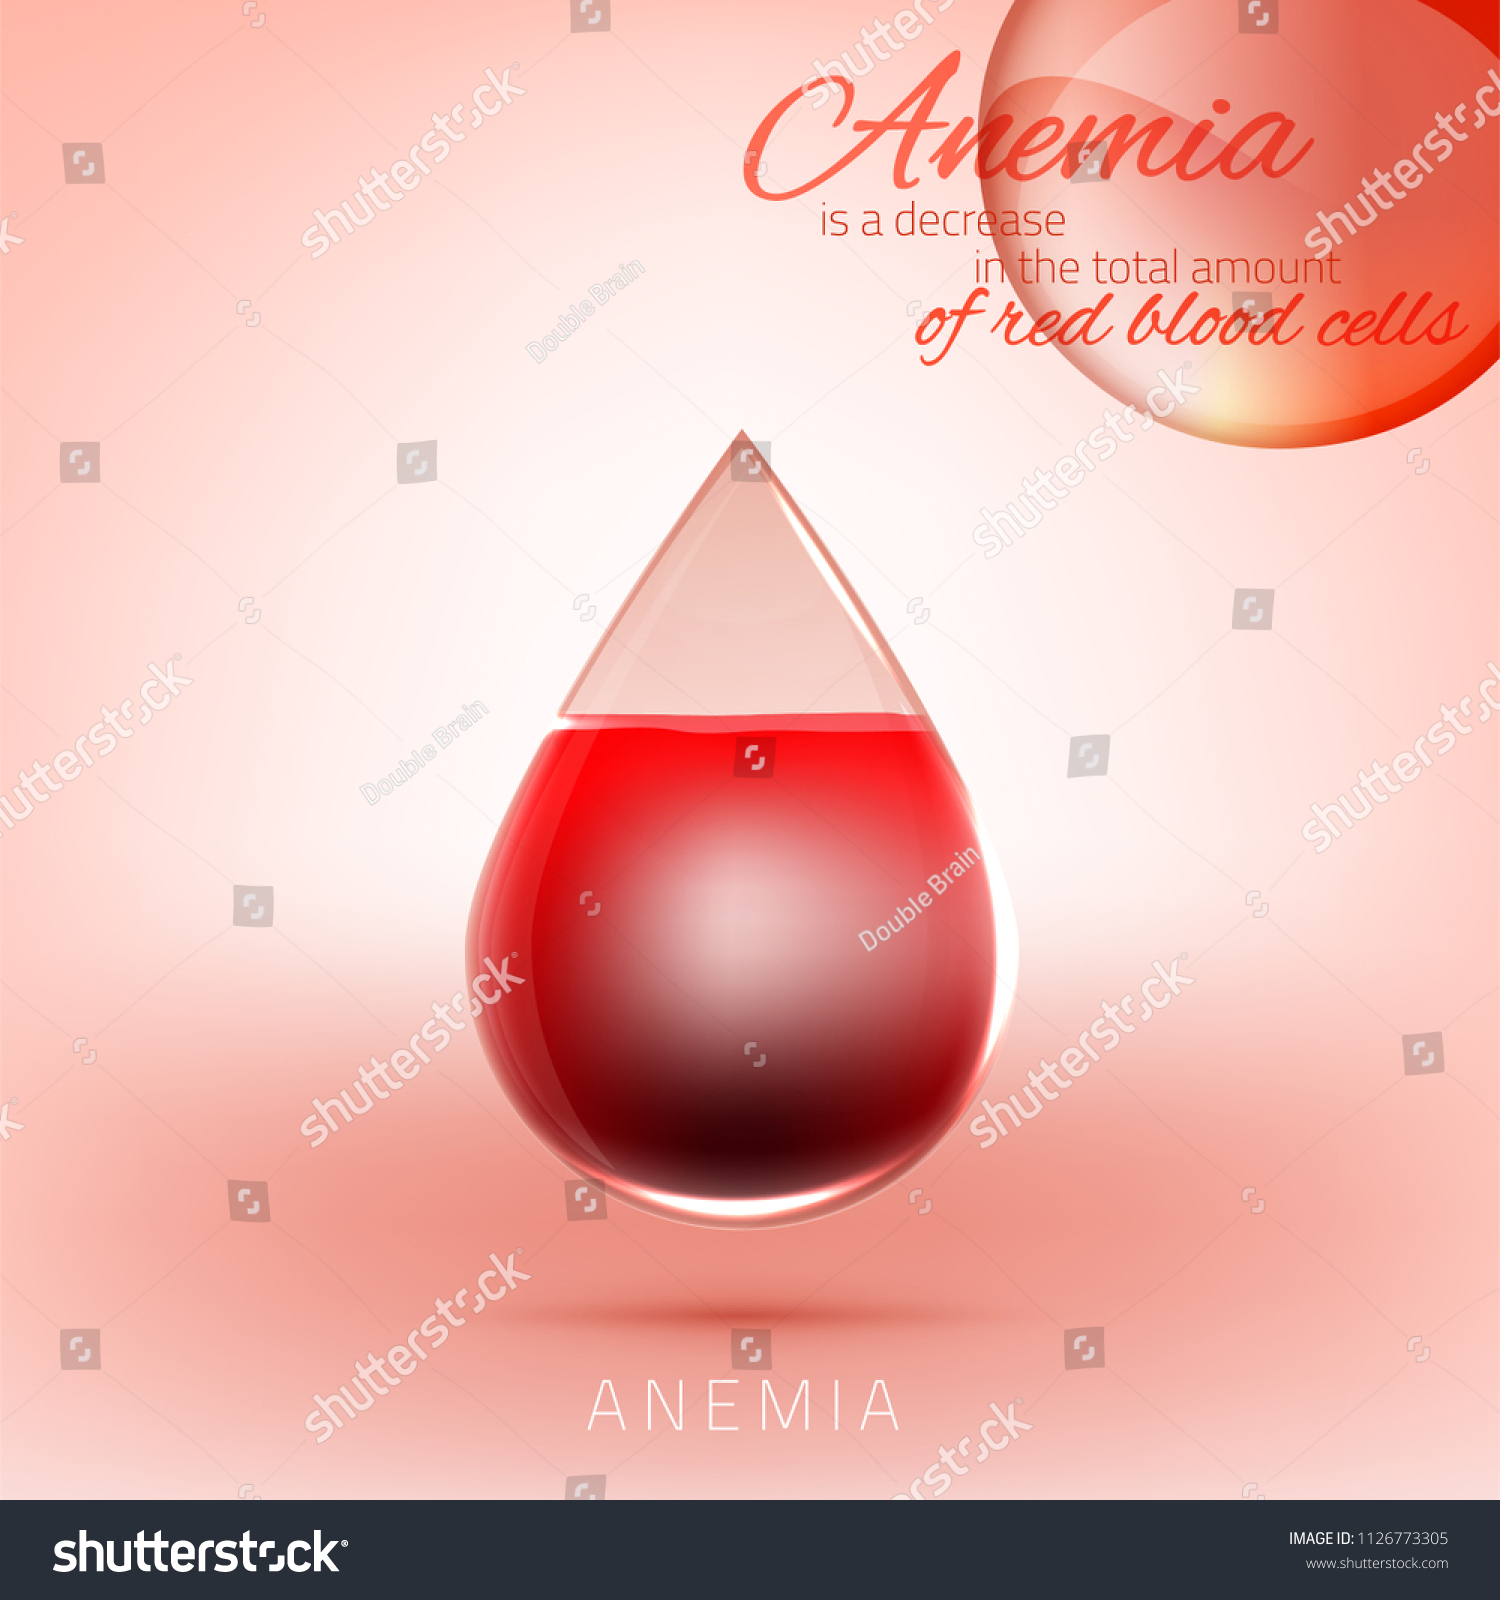 Anemia and Hemophilia concept. Transparent drop of blood with red cells level isolated on light pink background. Haemophilia disease awareness symbol. Vector illustration. #1126773305